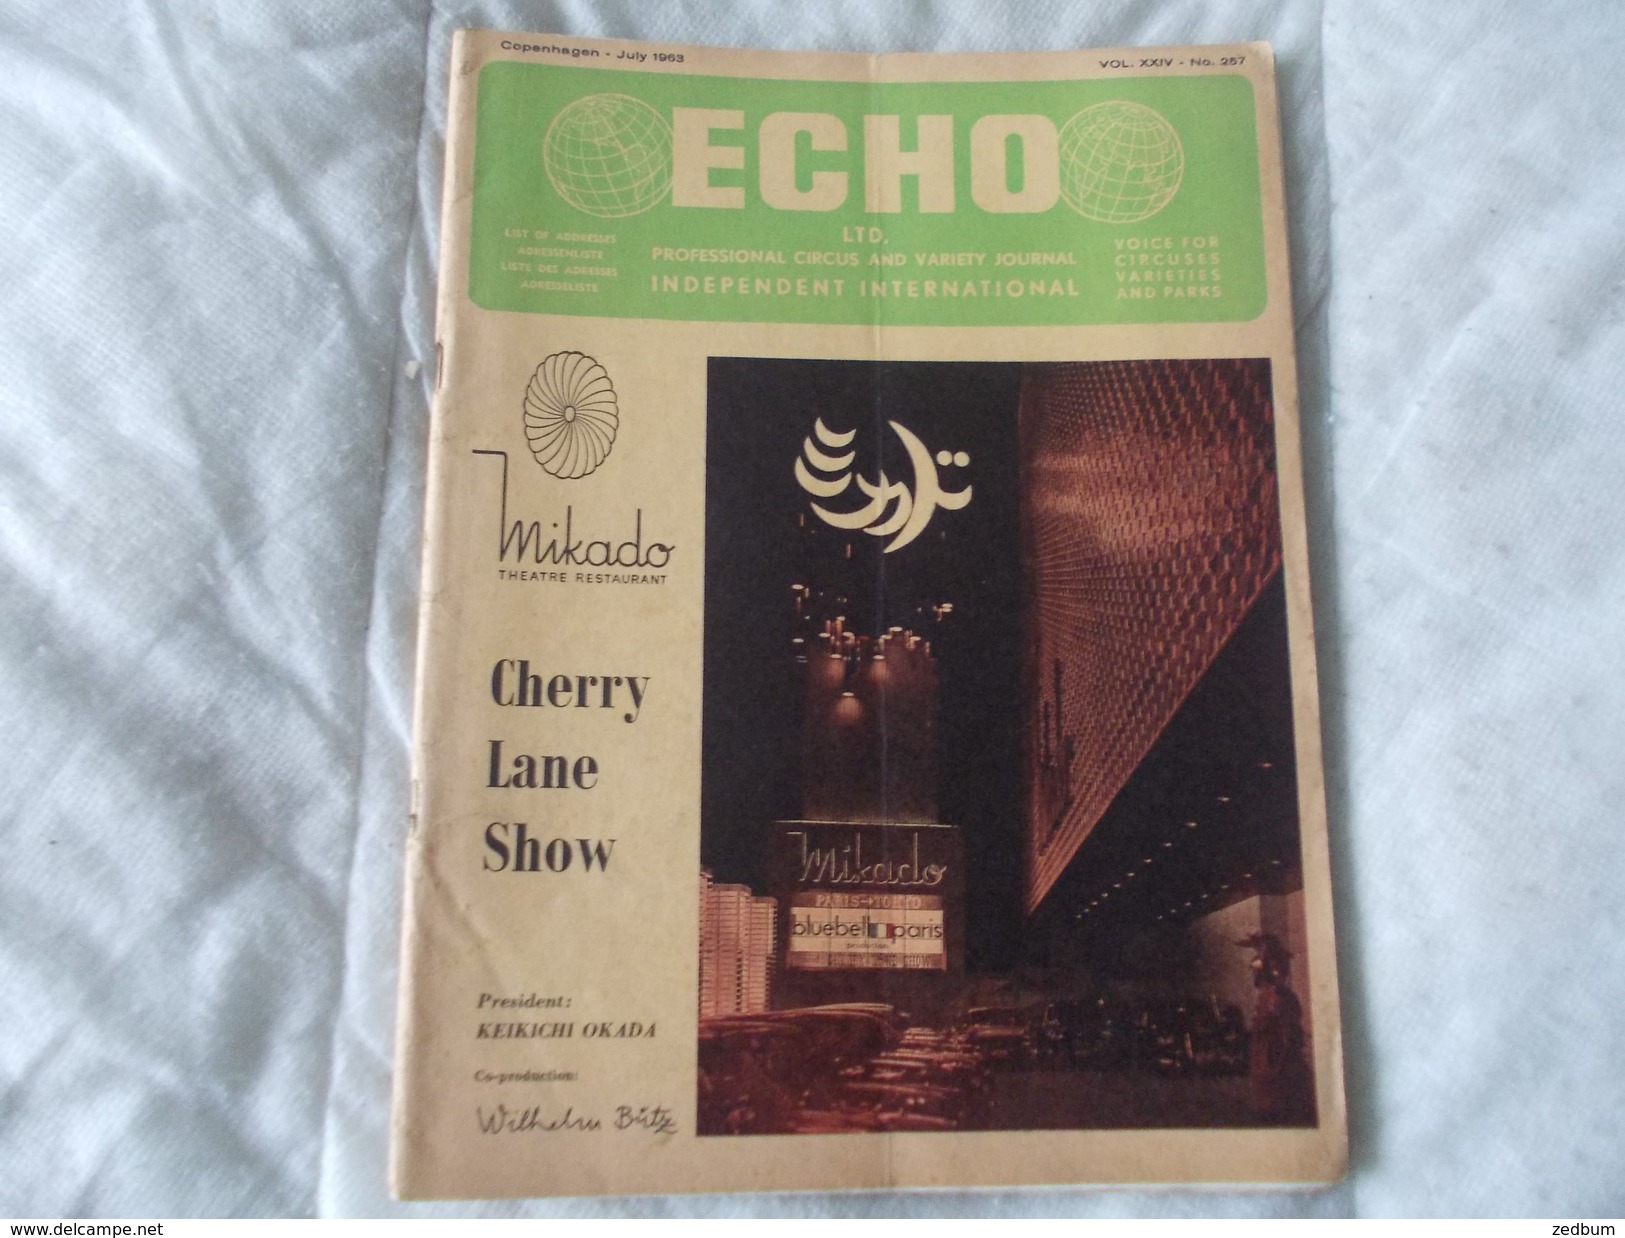 ECHO LTD Professional Circus And Variety Journal Independent International N° 257 July 1963 - Divertimento